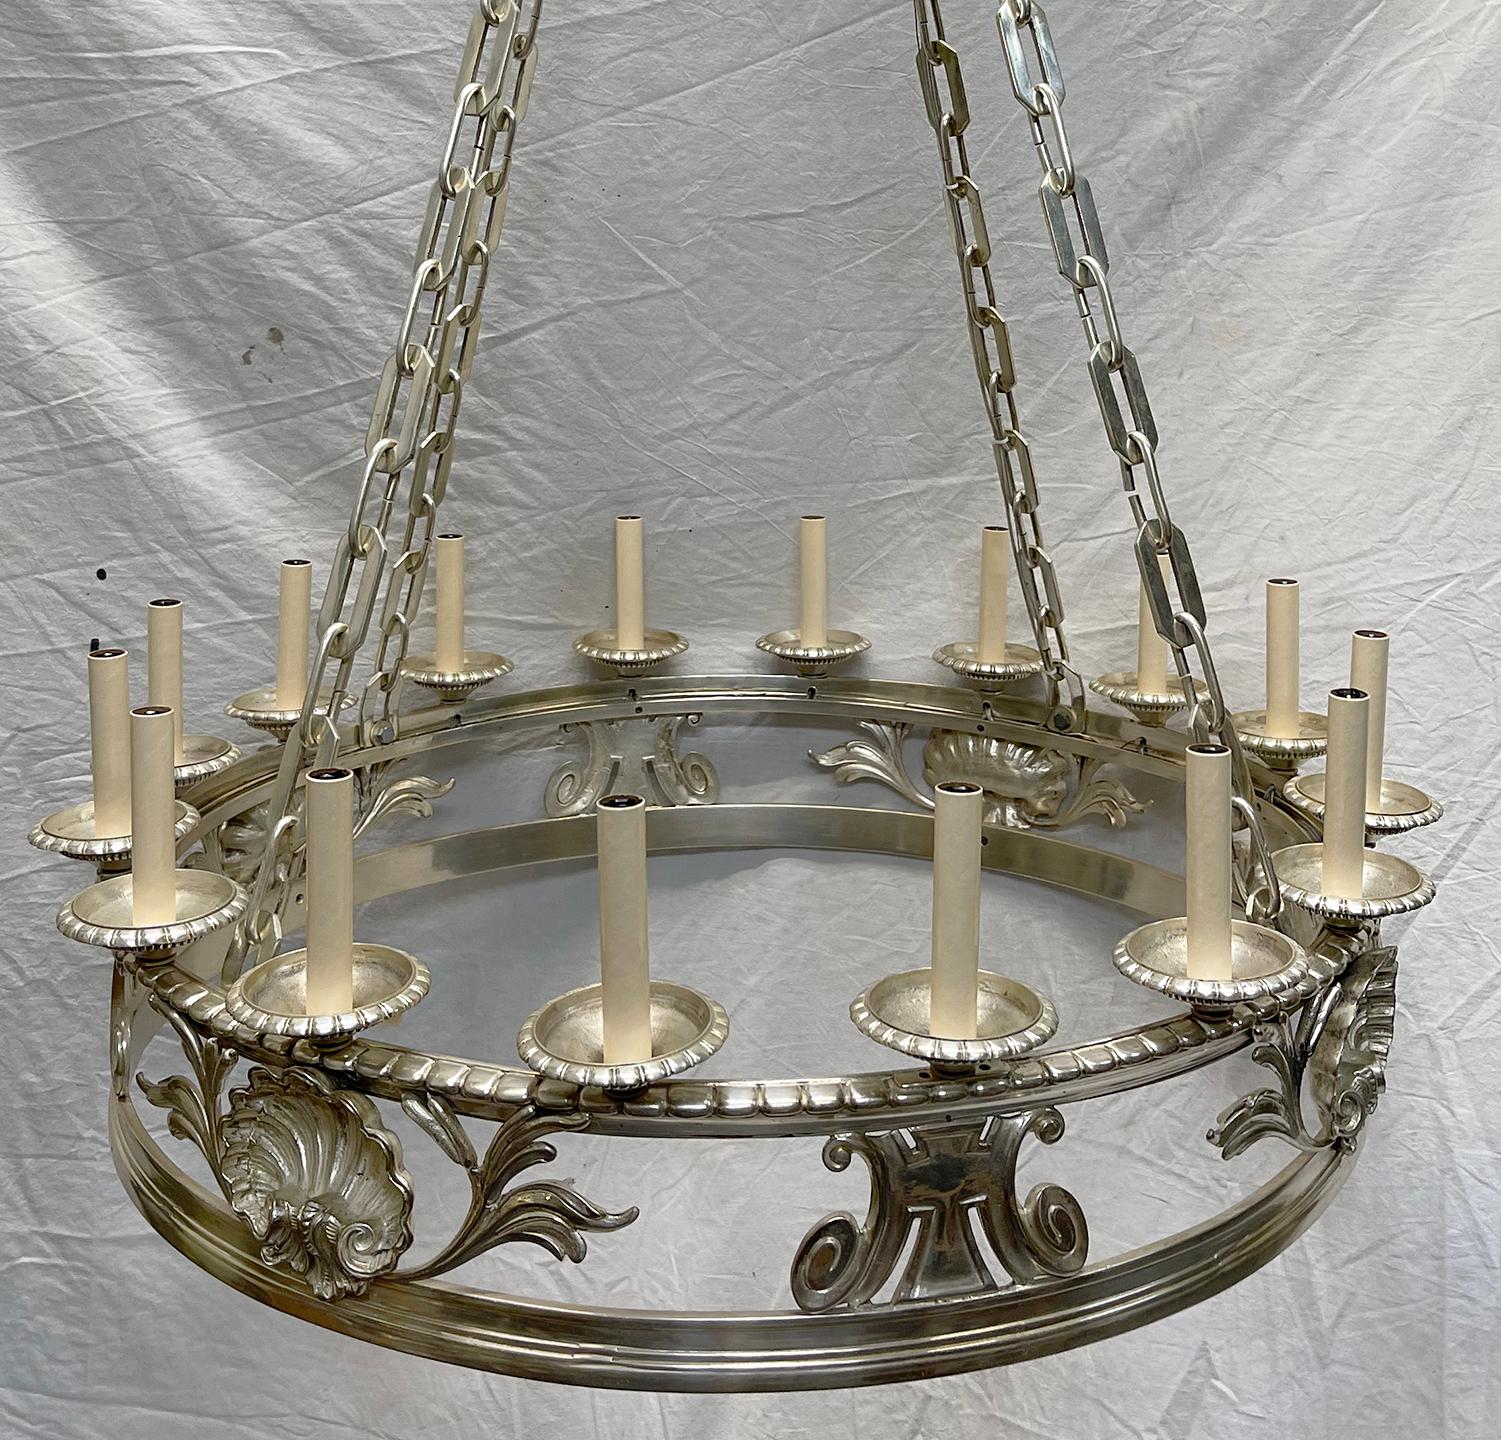 A circa 1900's English silver plated 12-light chandelier with foliage and shell motif.

Measurements:
Height:48